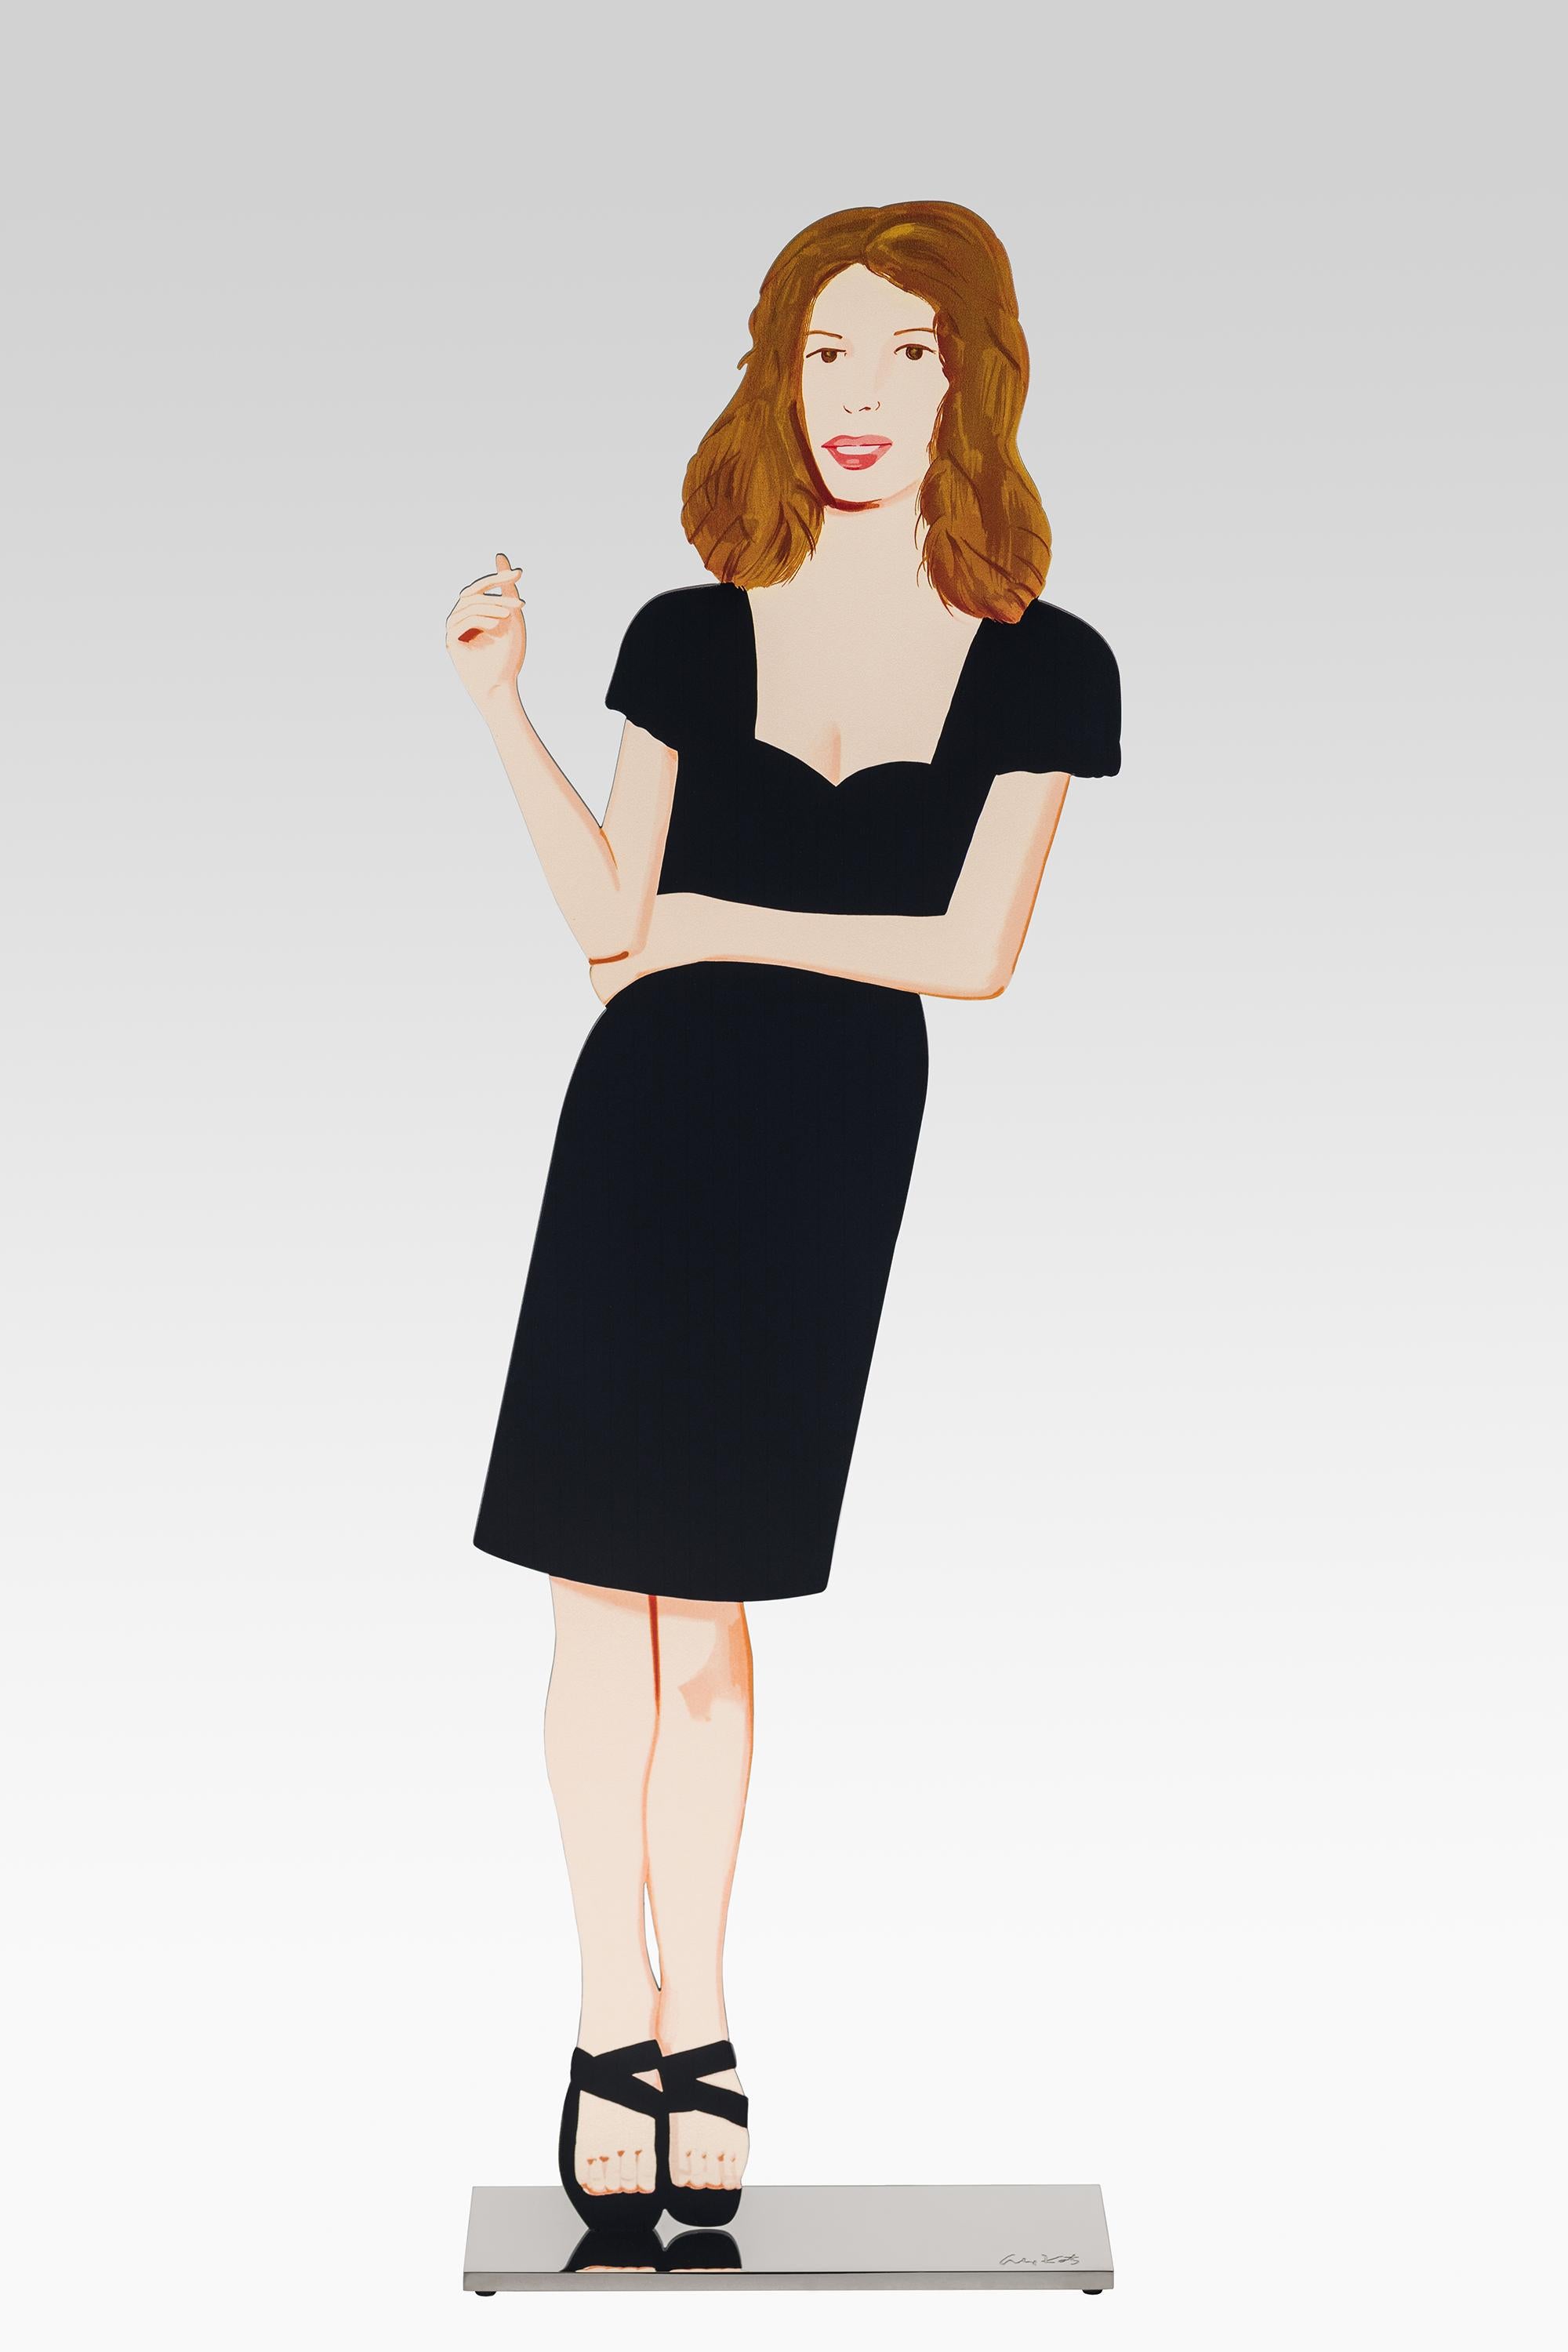 The "Black Dress" sculptures by Alex Katz are more than figurative sculptures. They are a homage to elegance, fashion and the female body. This cut-out is made from powder-coated aluminium and stands on an aluminium plinth. 63,6 x 20 cm. Edition of